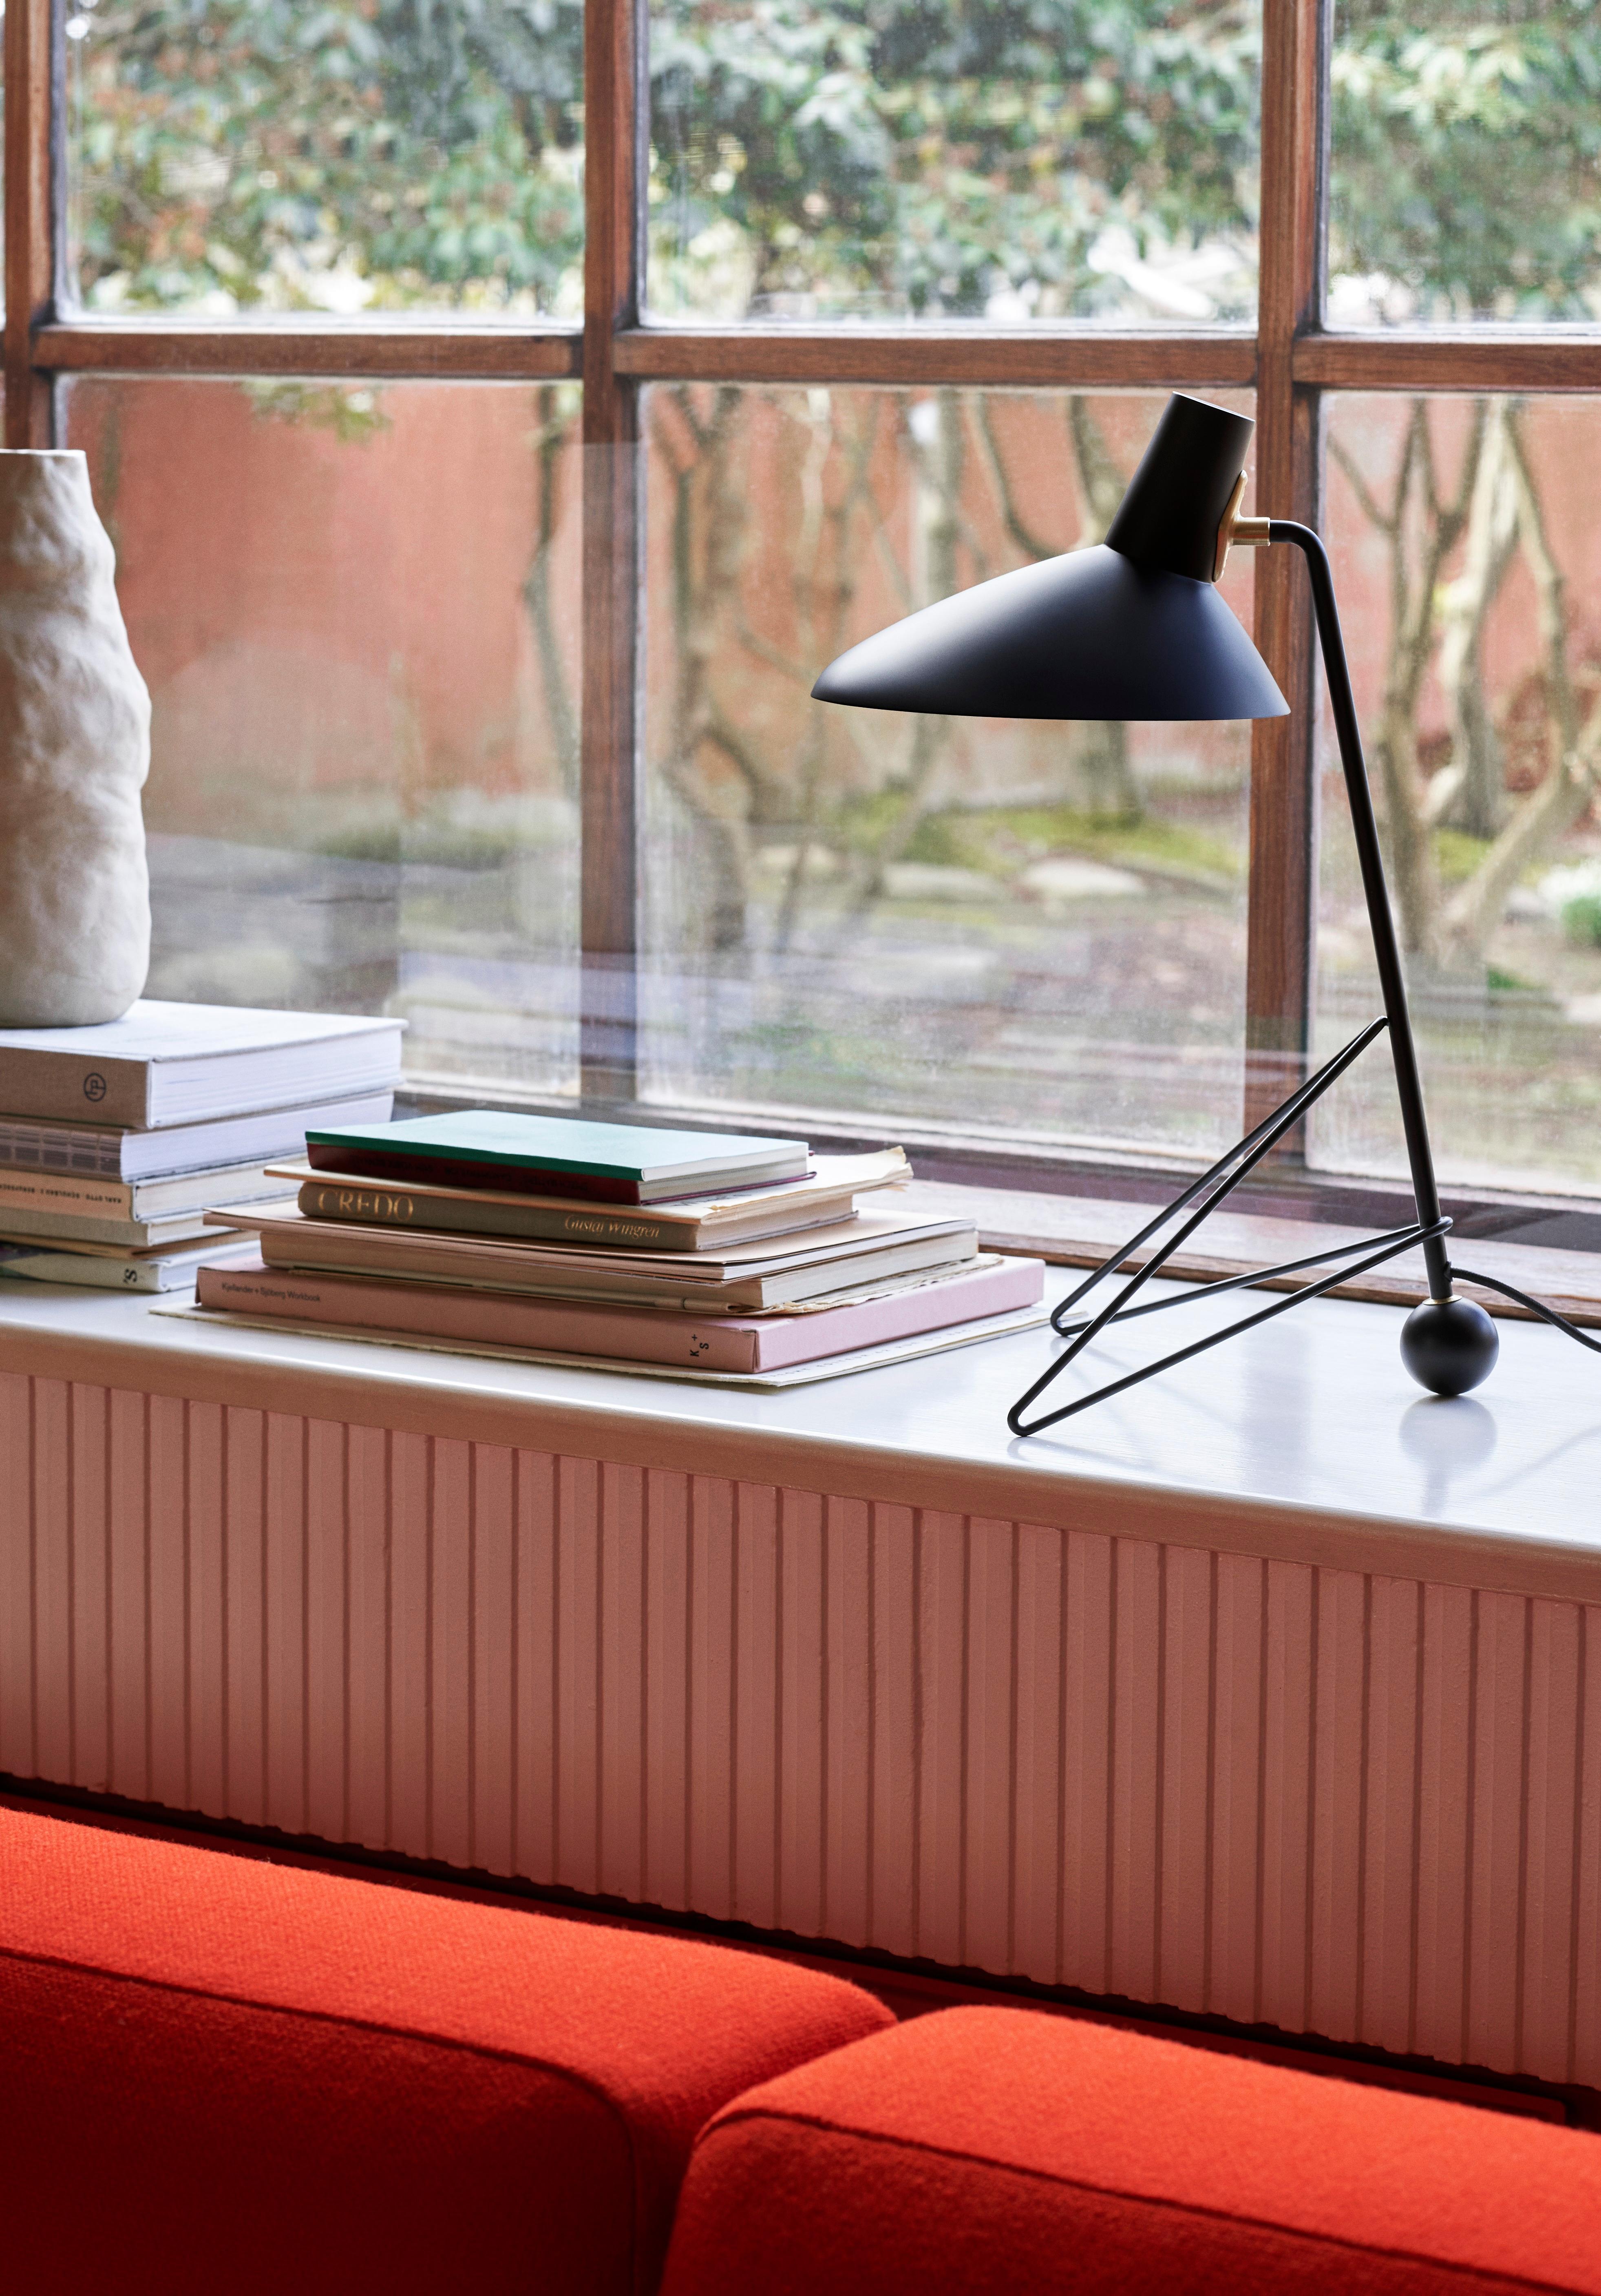 After the success of its floor lamp, &Tradition has expanded the Tripod series to include a table lamp with the same timeless design. 
Tripod, a table lamp built from powder-coated steel with brass details, reflects the clean minimalism of the